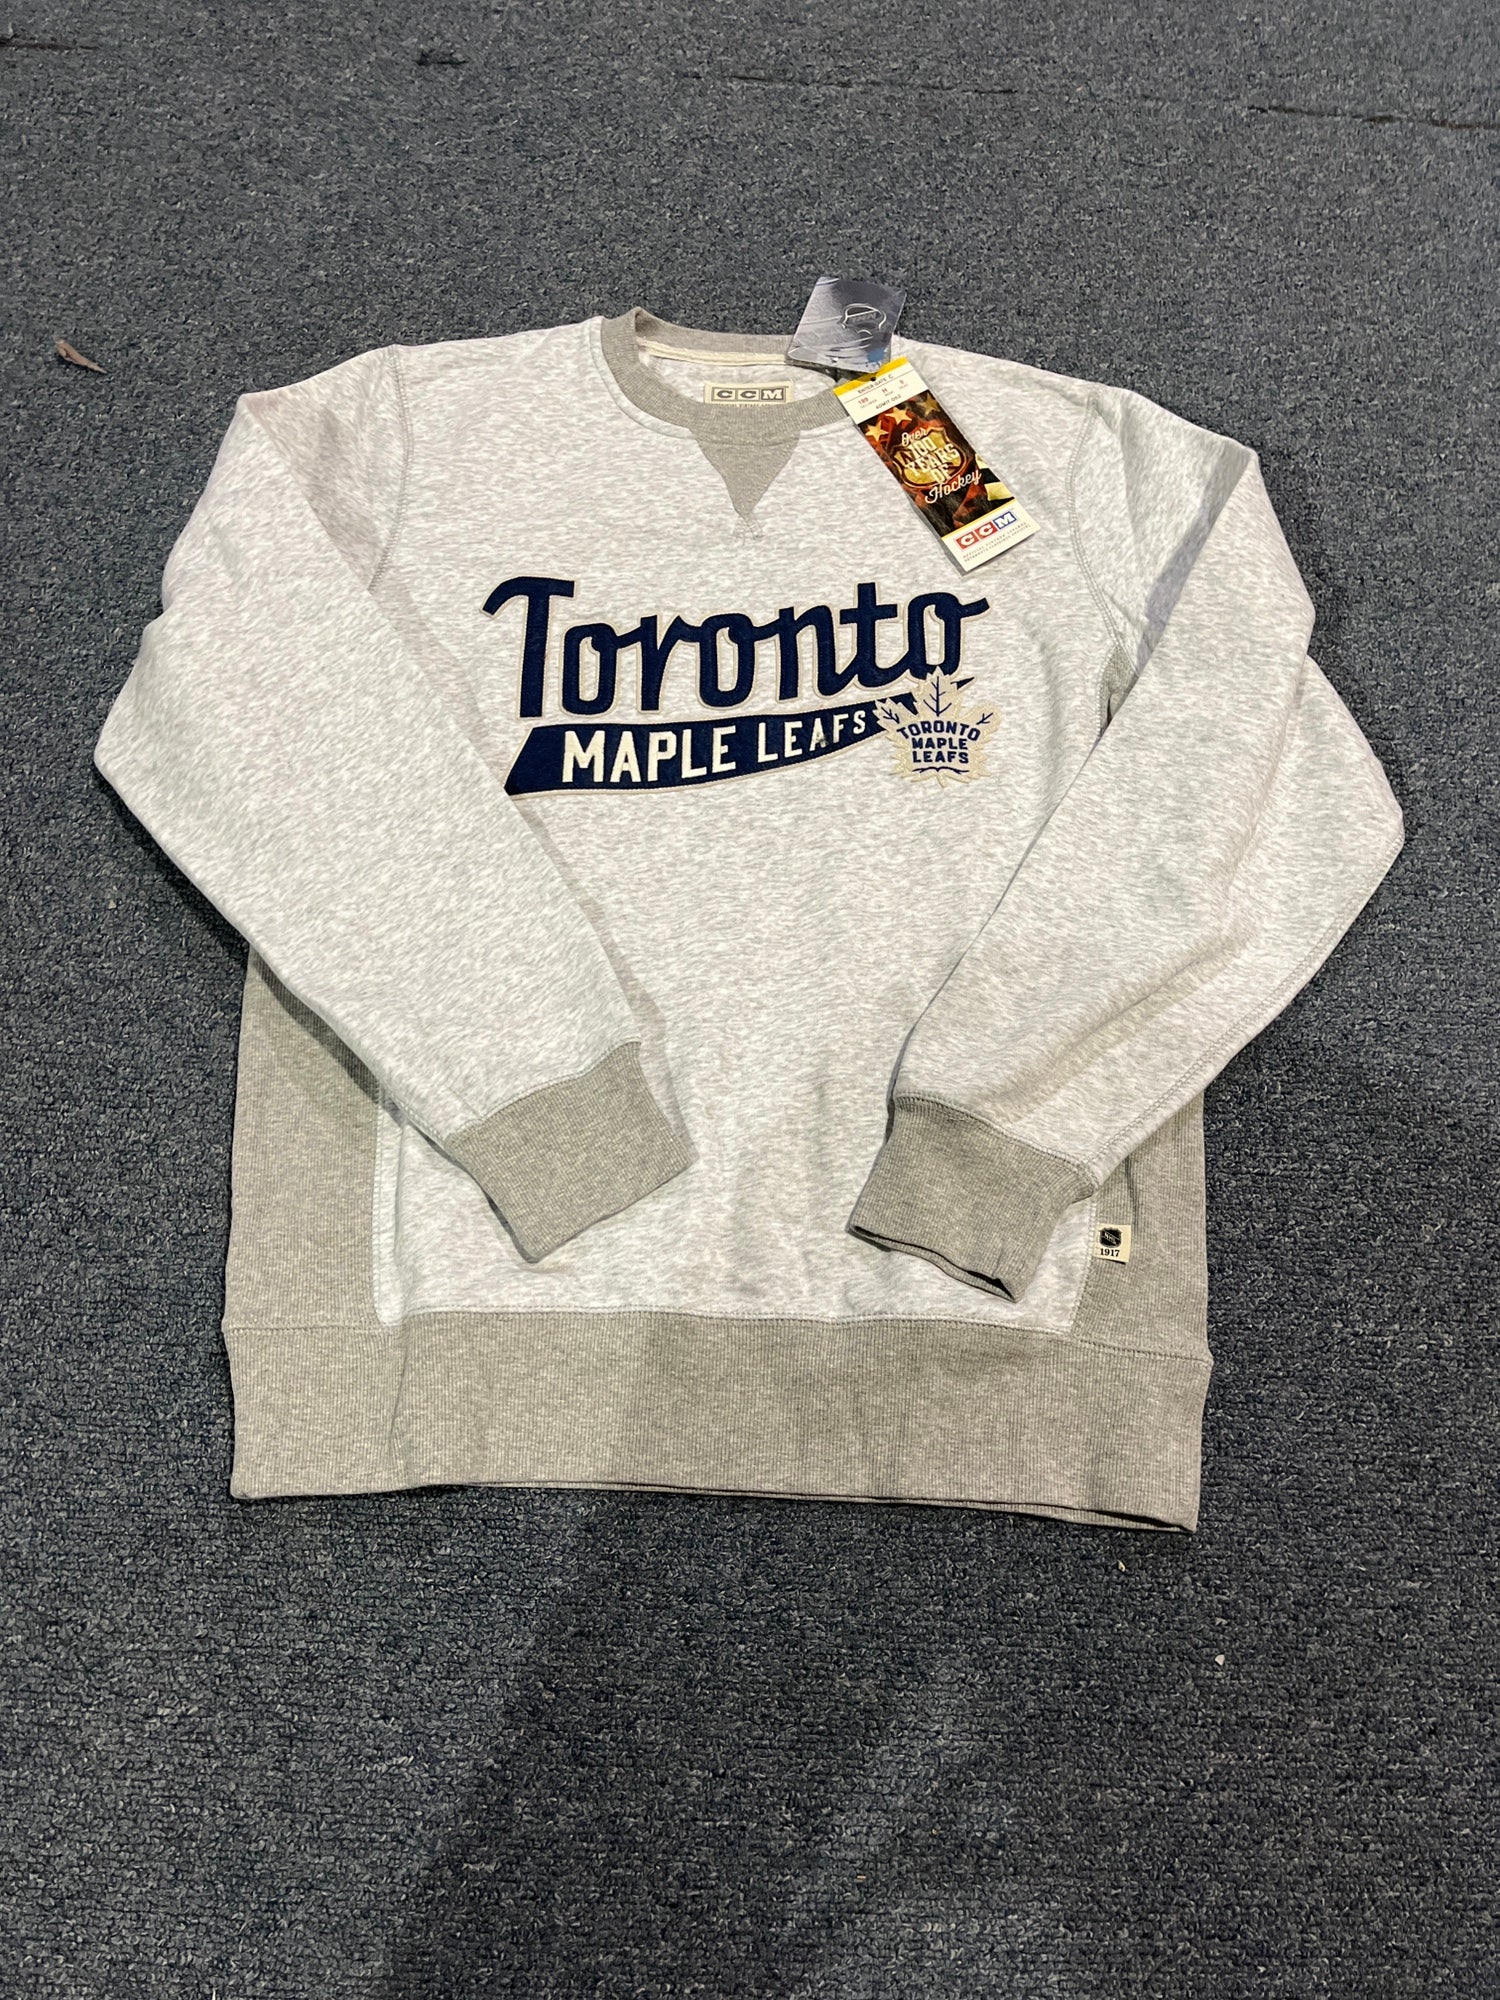 SportBuffShop.com on X: Toronto Maple Leafs hoodies make a perfect gift  for the diehard Leafs fan in your life. Browse our incredible selection of  authentic Toronto Maple Leafs hoodies today! Choose your